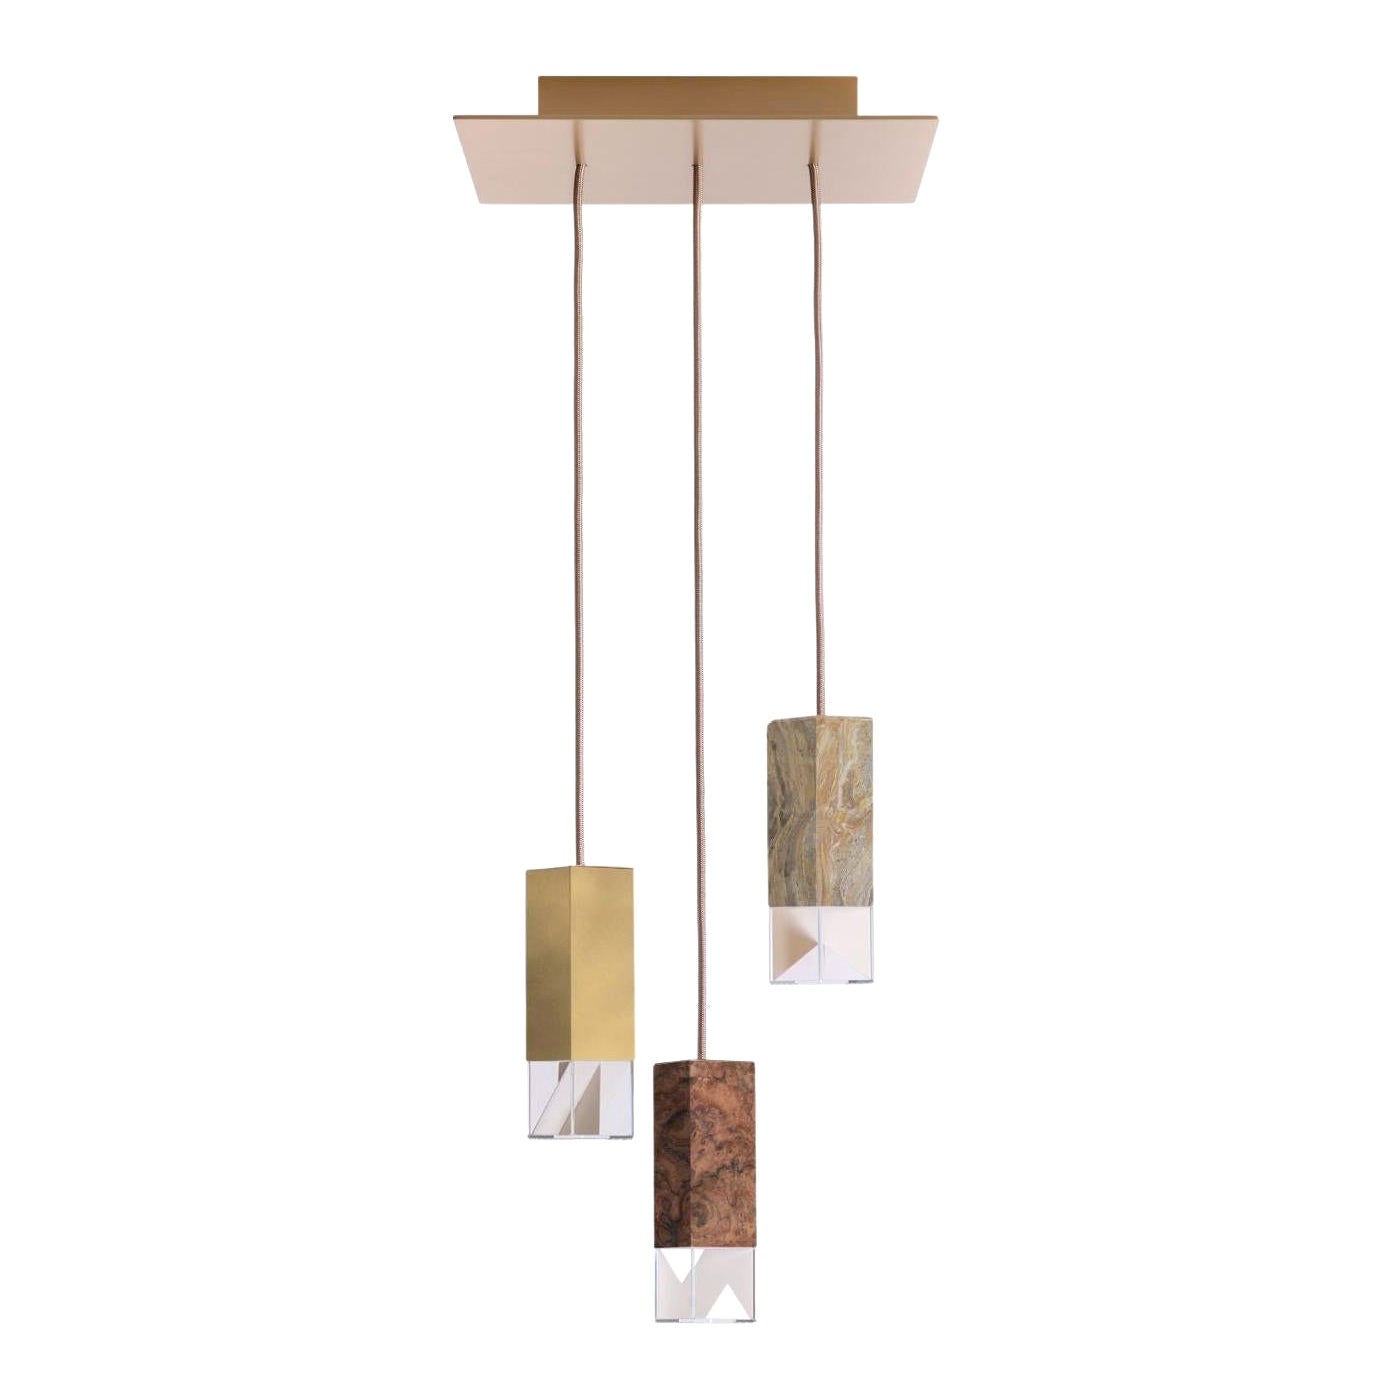 Lamp One Collection Chandelier 02 by Formaminima